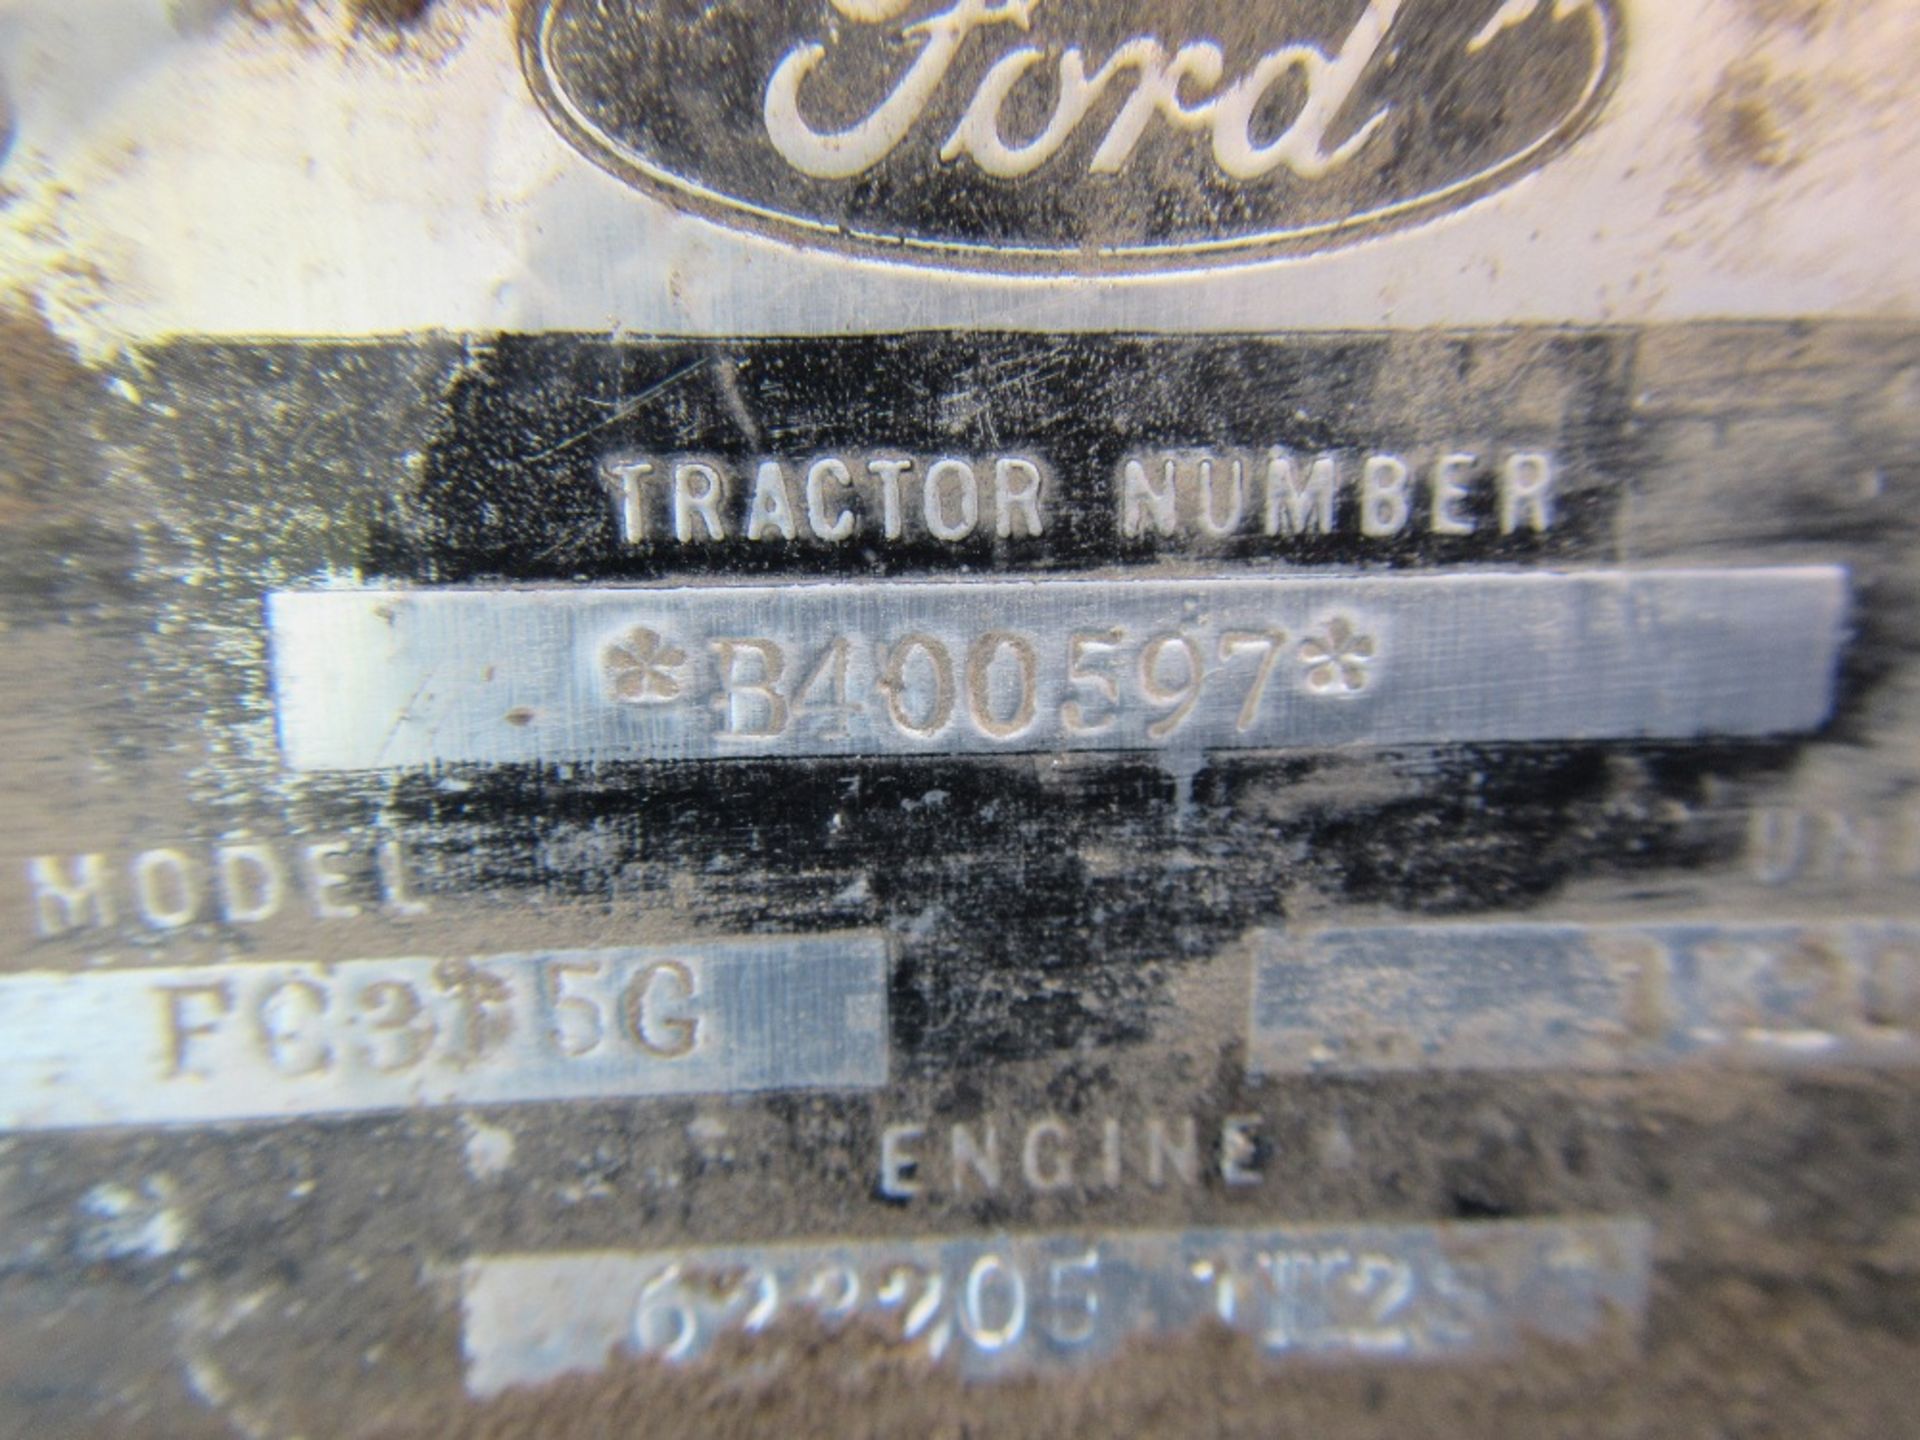 Ford 7710 2wd Tractor Ser. No. B400597 - Image 16 of 16